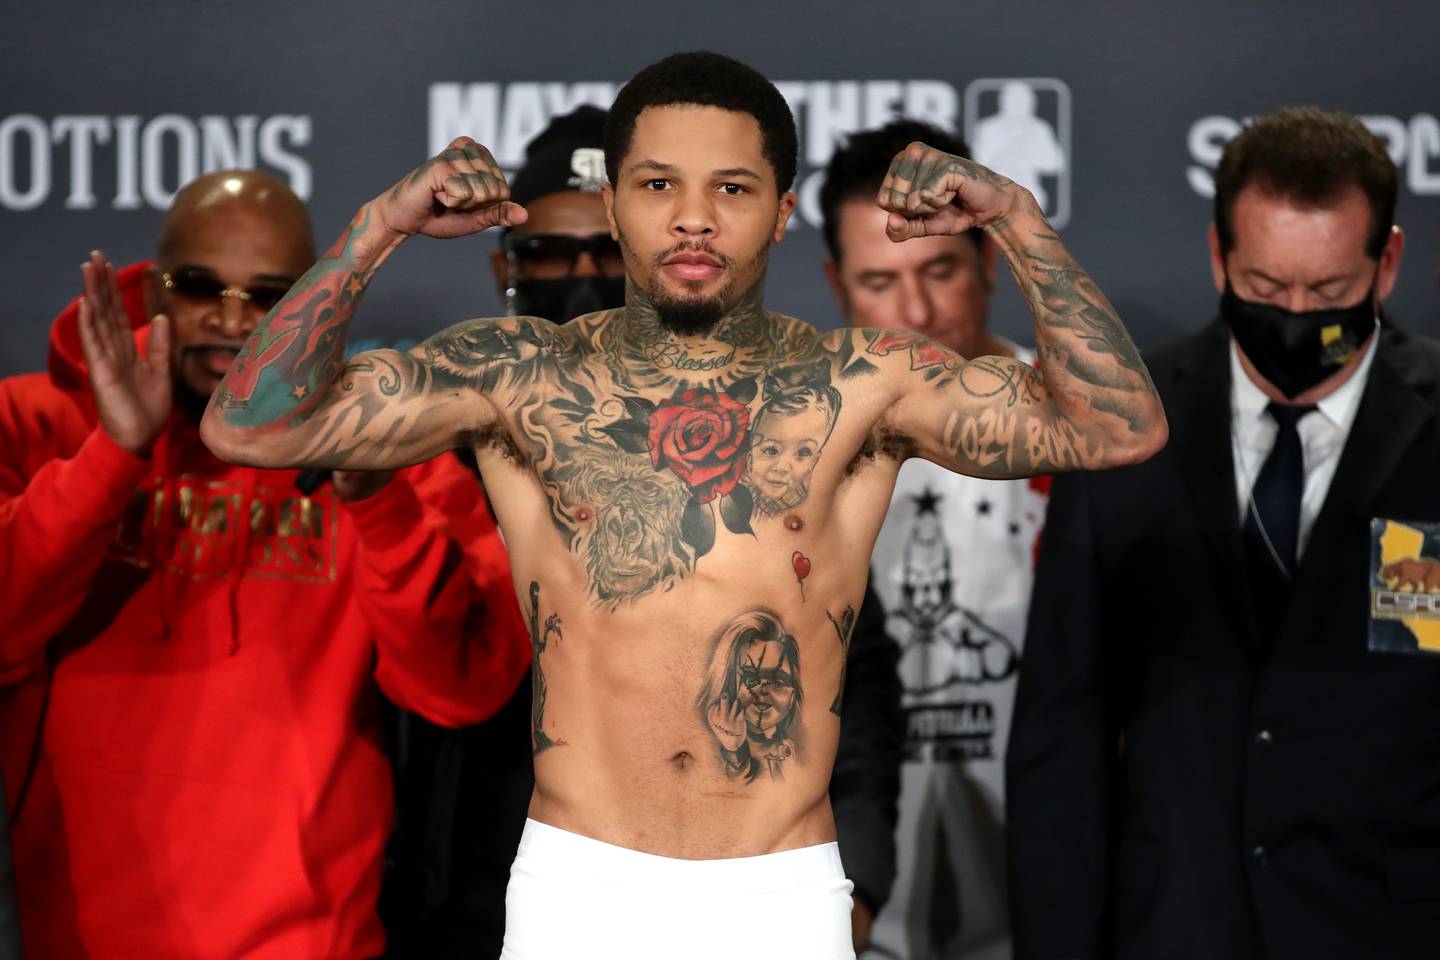 LOS ANGELES, CALIFORNIA - DECEMBER 04: Gervonta Davis poses for media during a weigh in prior to his WBA World Lightweight Championship title bout against Isaac Cruz at the JW Marriott Los Angeles L.A. Live on December 04, 2021 in Los Angeles, California.